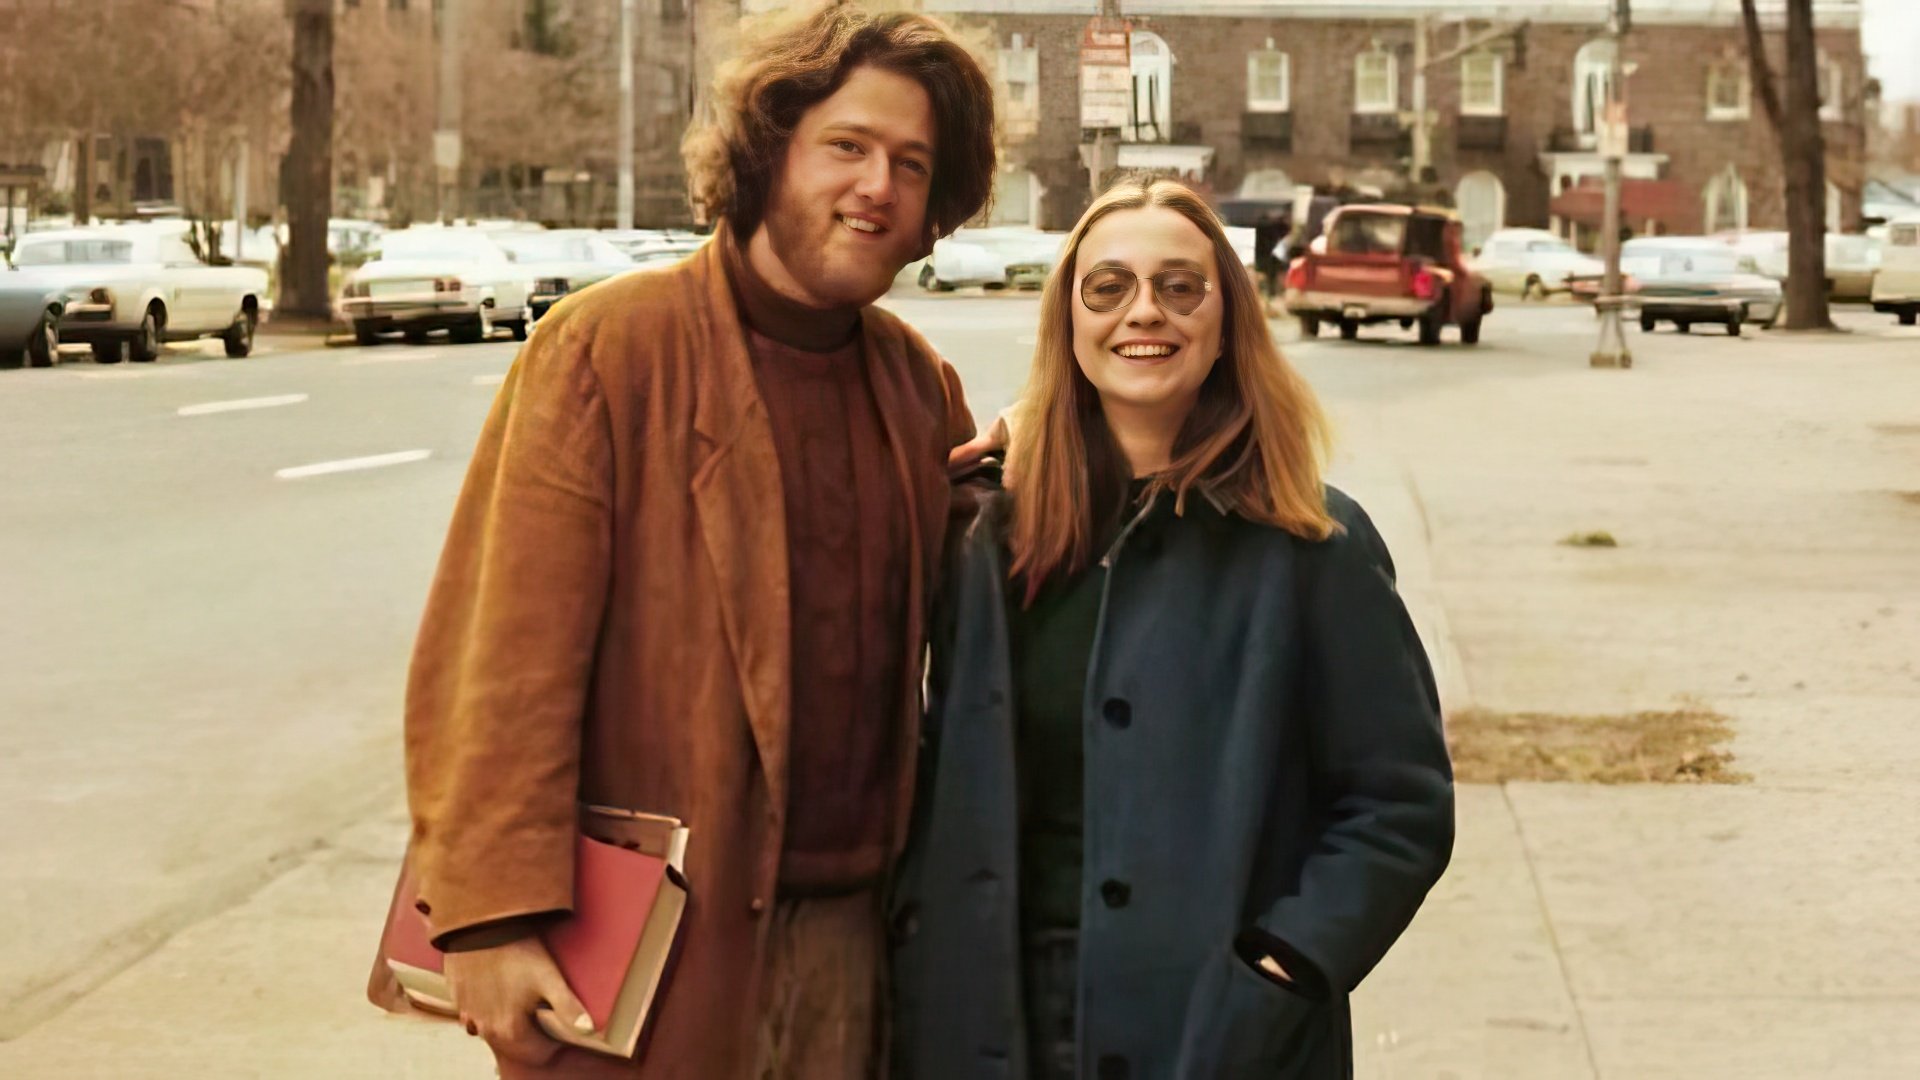 Young Bill and Hillary Clinton (1971)